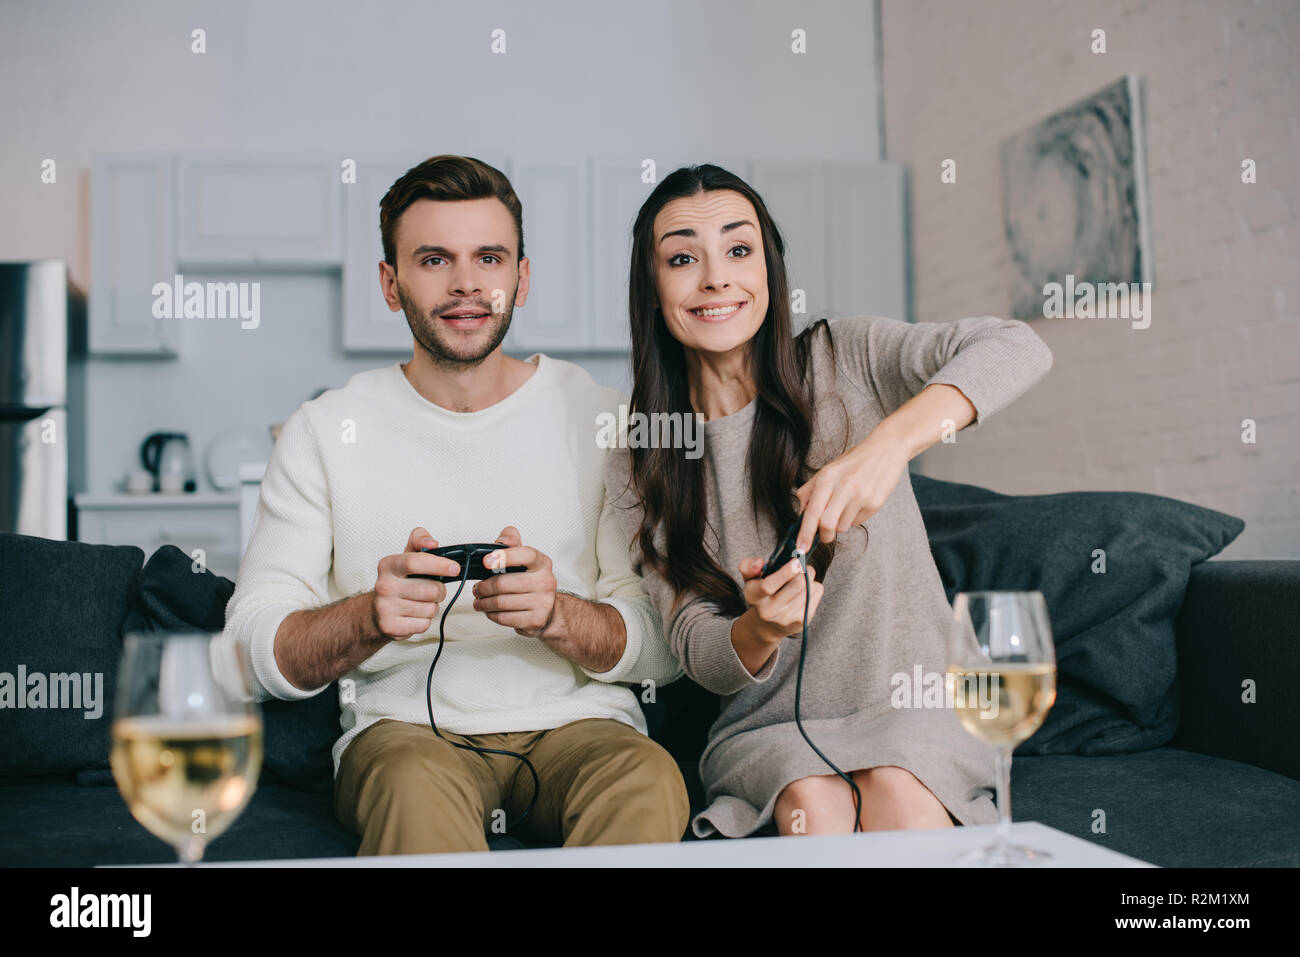 happy young couple playing retro video game on couch at home Stock Photo